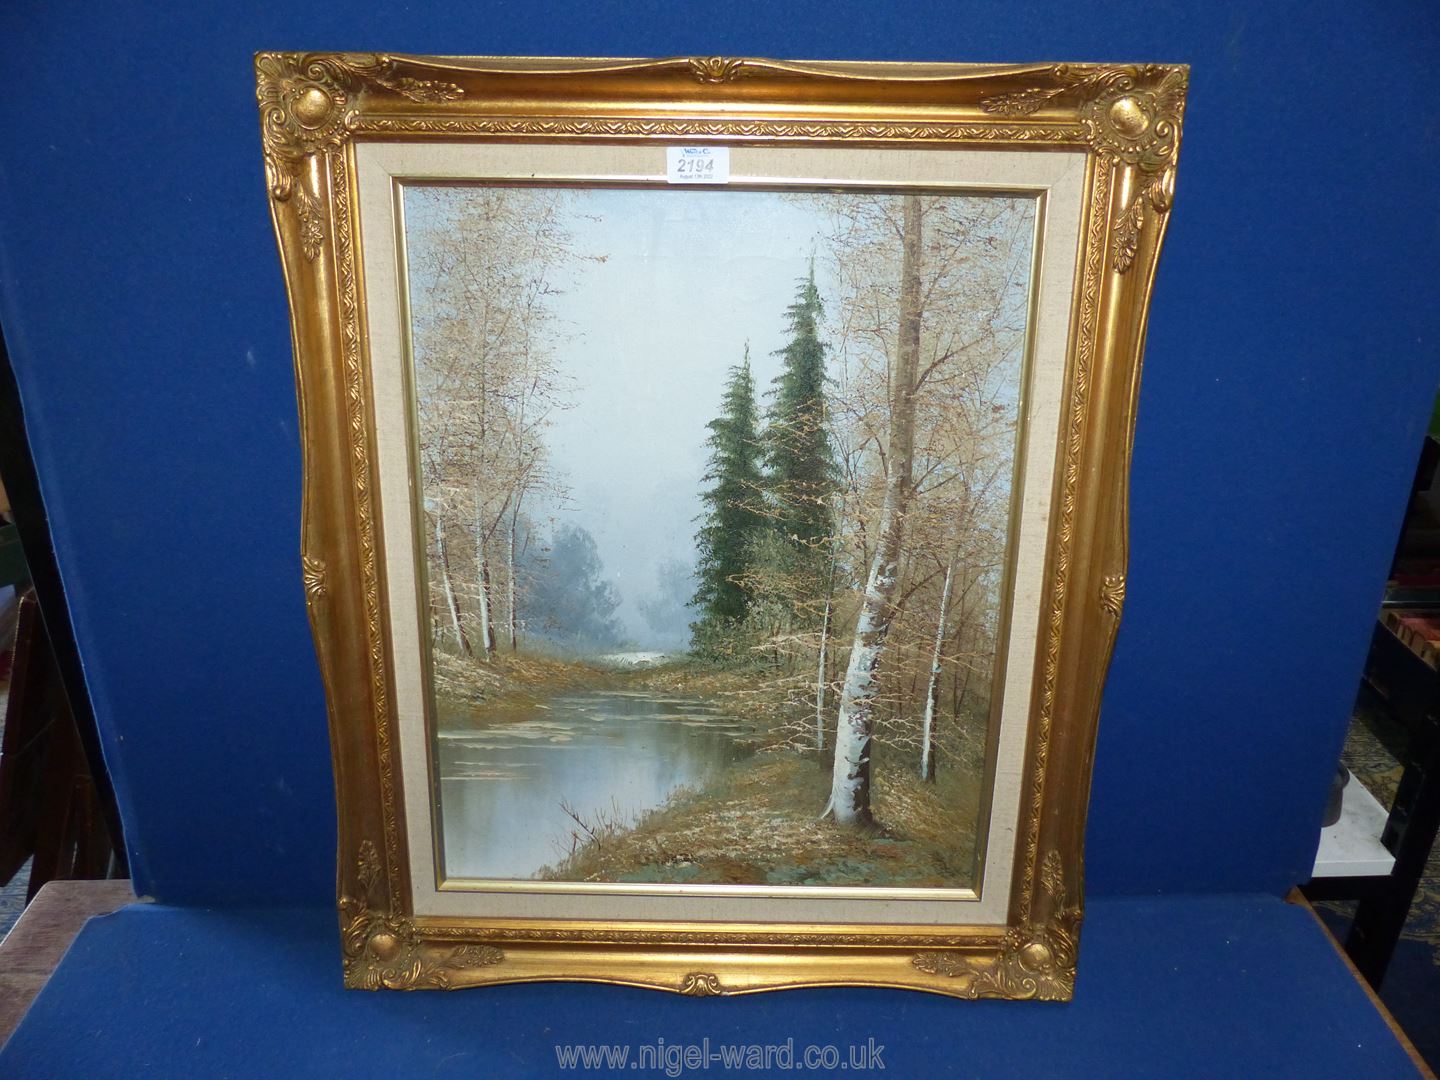 An unsigned Oil on canvas in a gilt frame of a River flowing through woodland, 21 1/4" x 25 1/2".